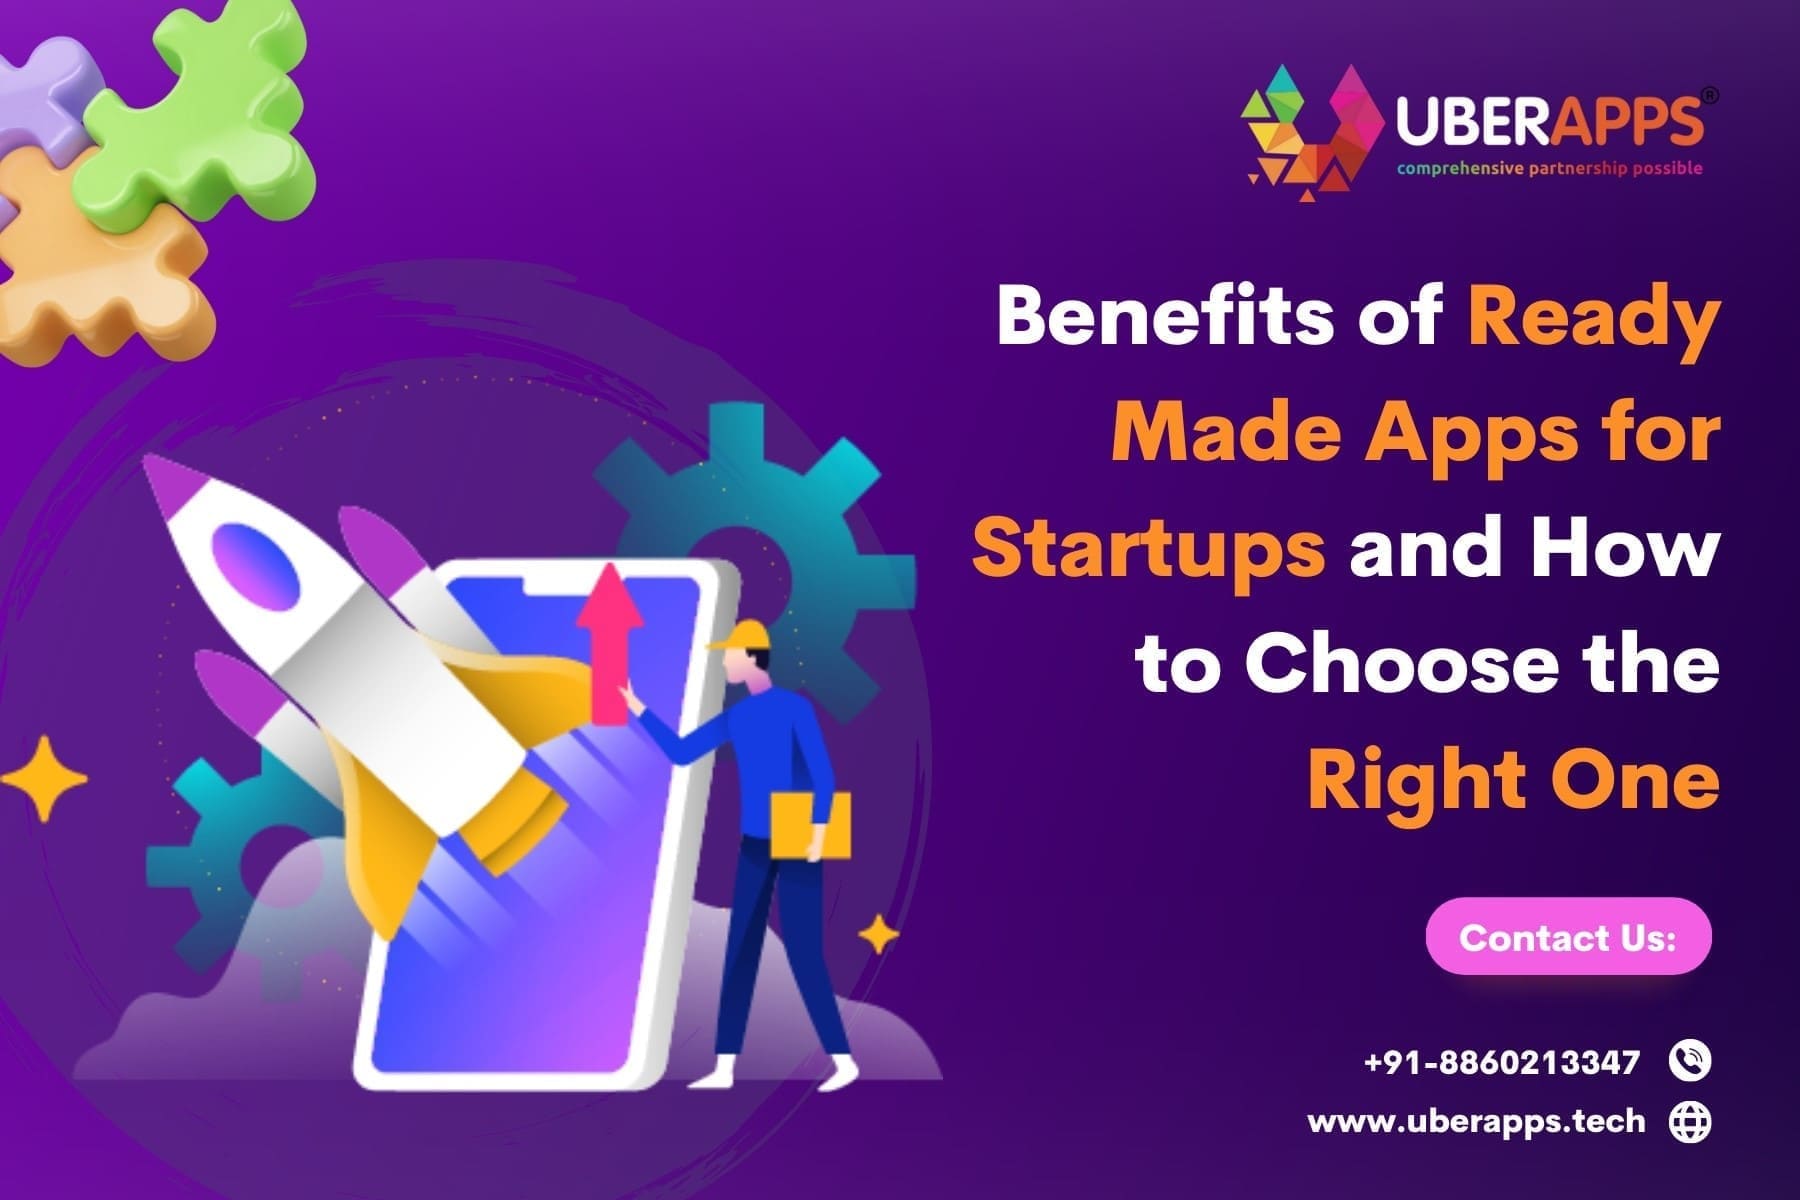 Benefits of Ready-Made Apps for Startups